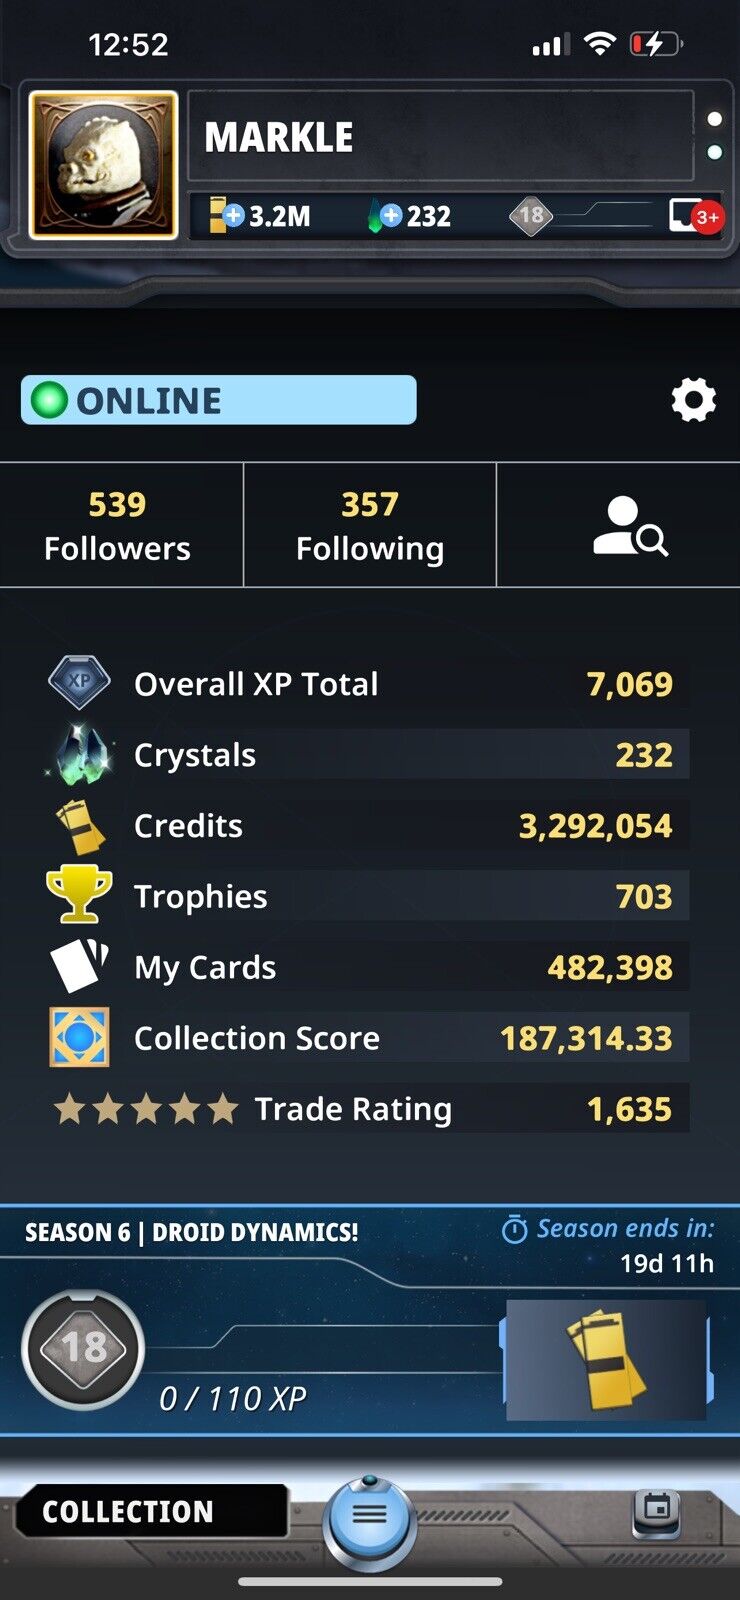 Entire Topps Star Wars Digital Card Trader Account TOP 5% 187,314K SCORE Day 1